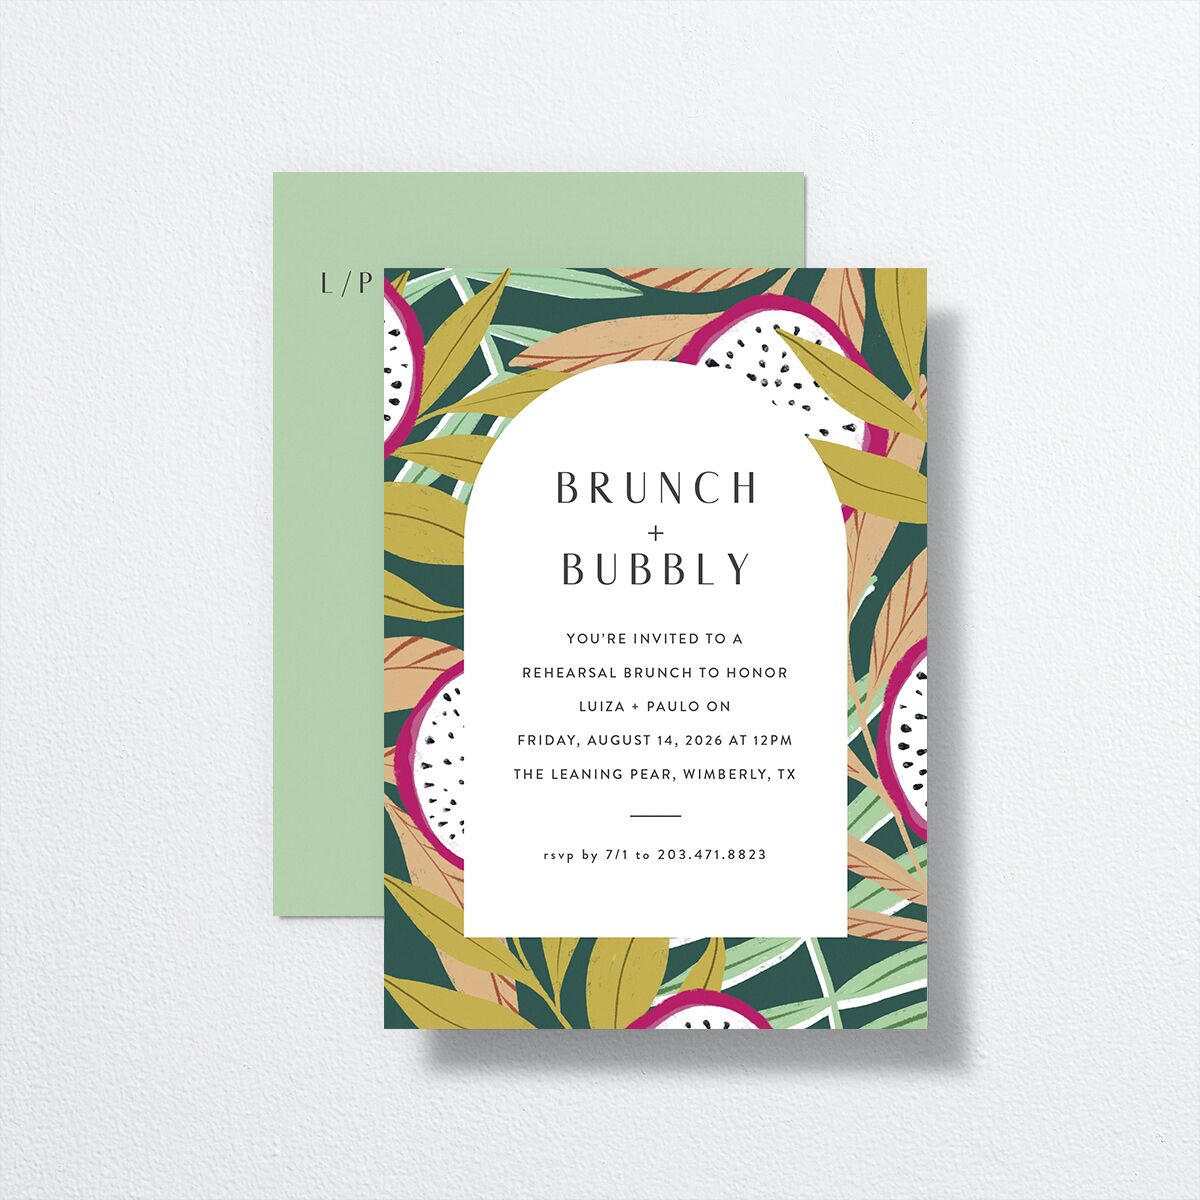 Vibrant Rio Rehearsal Dinner Invitations front-and-back in teal